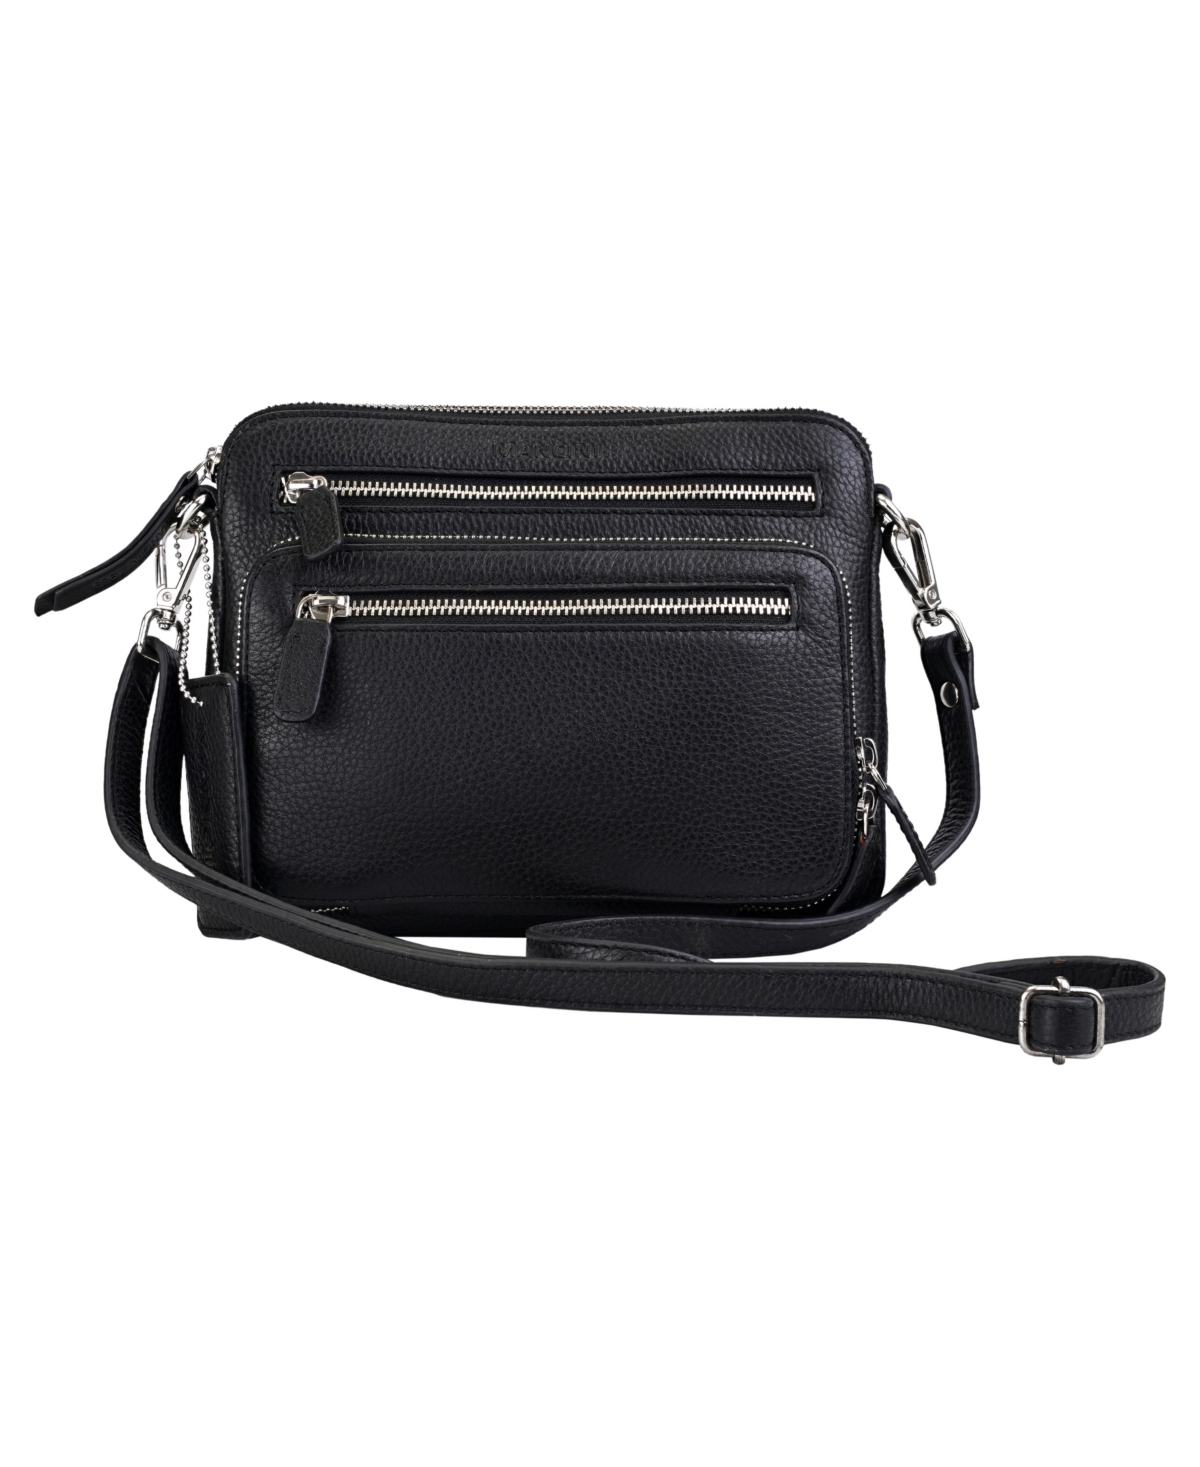 Mancini Pebbled Collection Valerie Leather Mini Crossbody Bag In Black